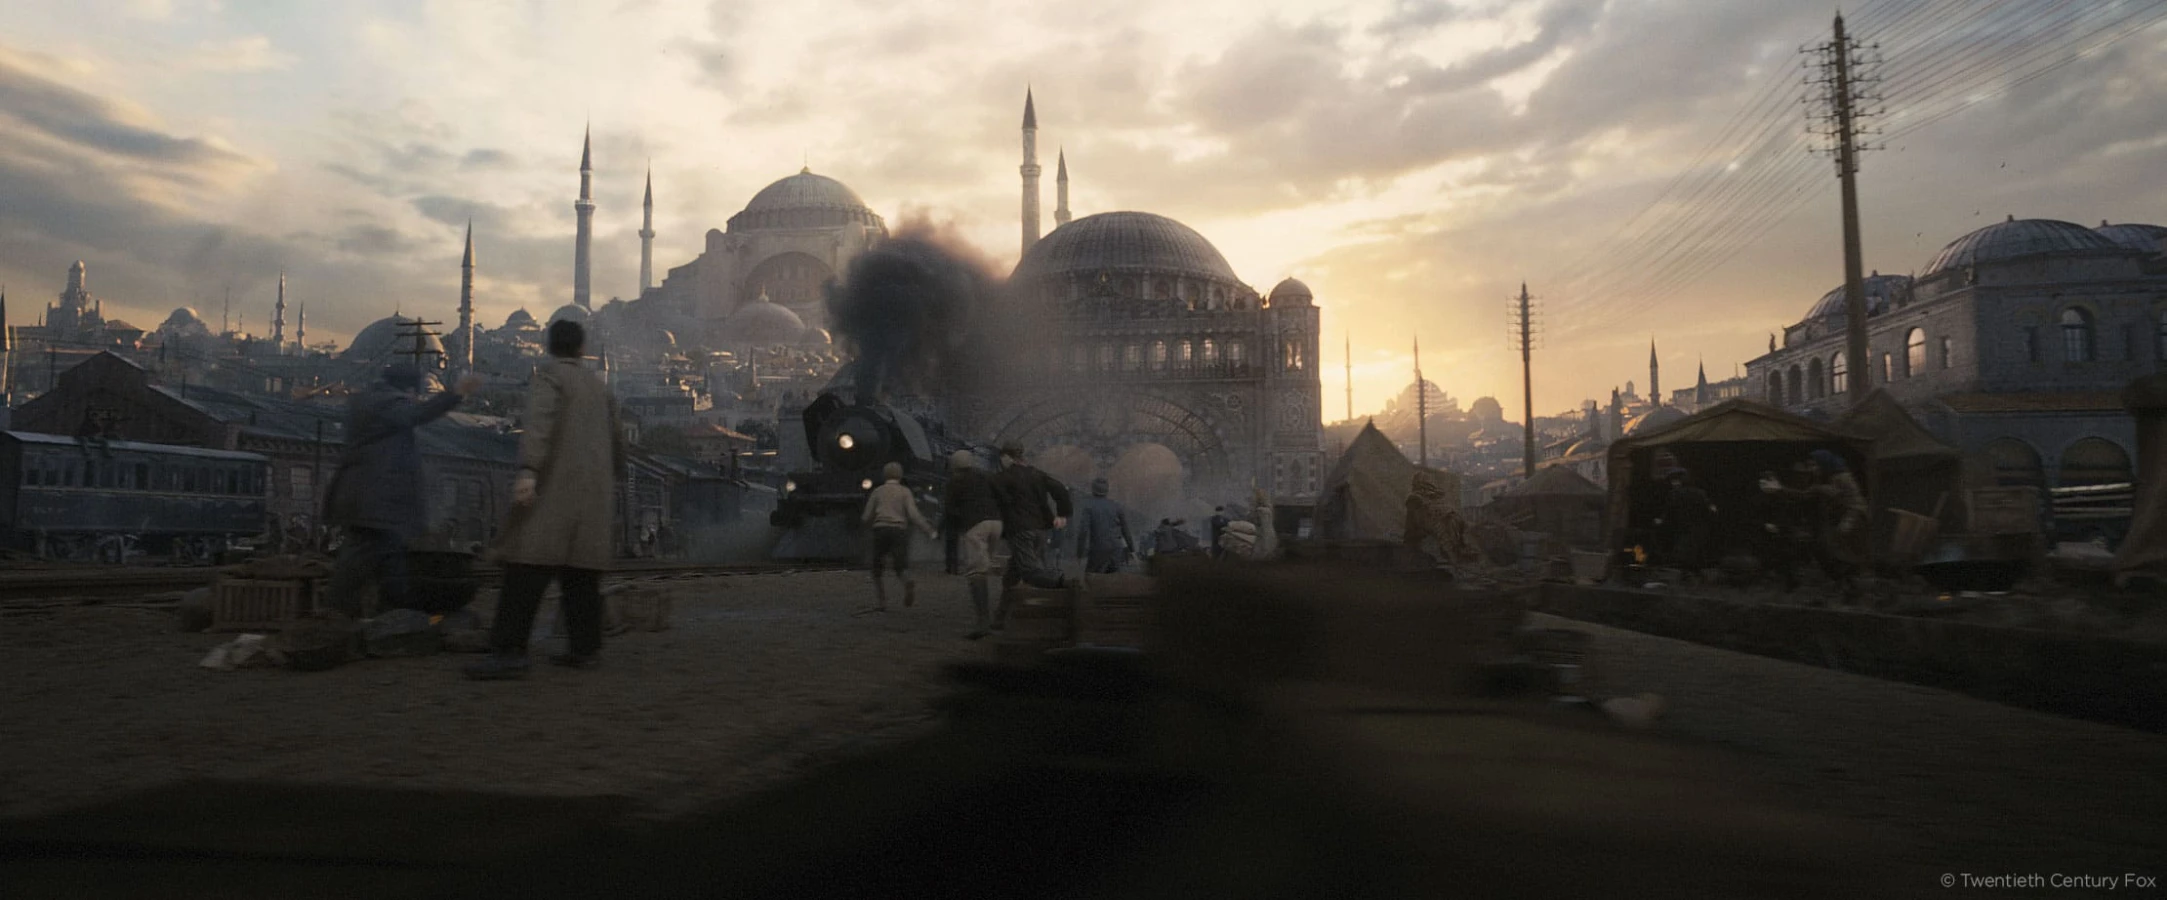  Murder on the Orient Express Istanbul with a shot of a mosque Raynault vfx 